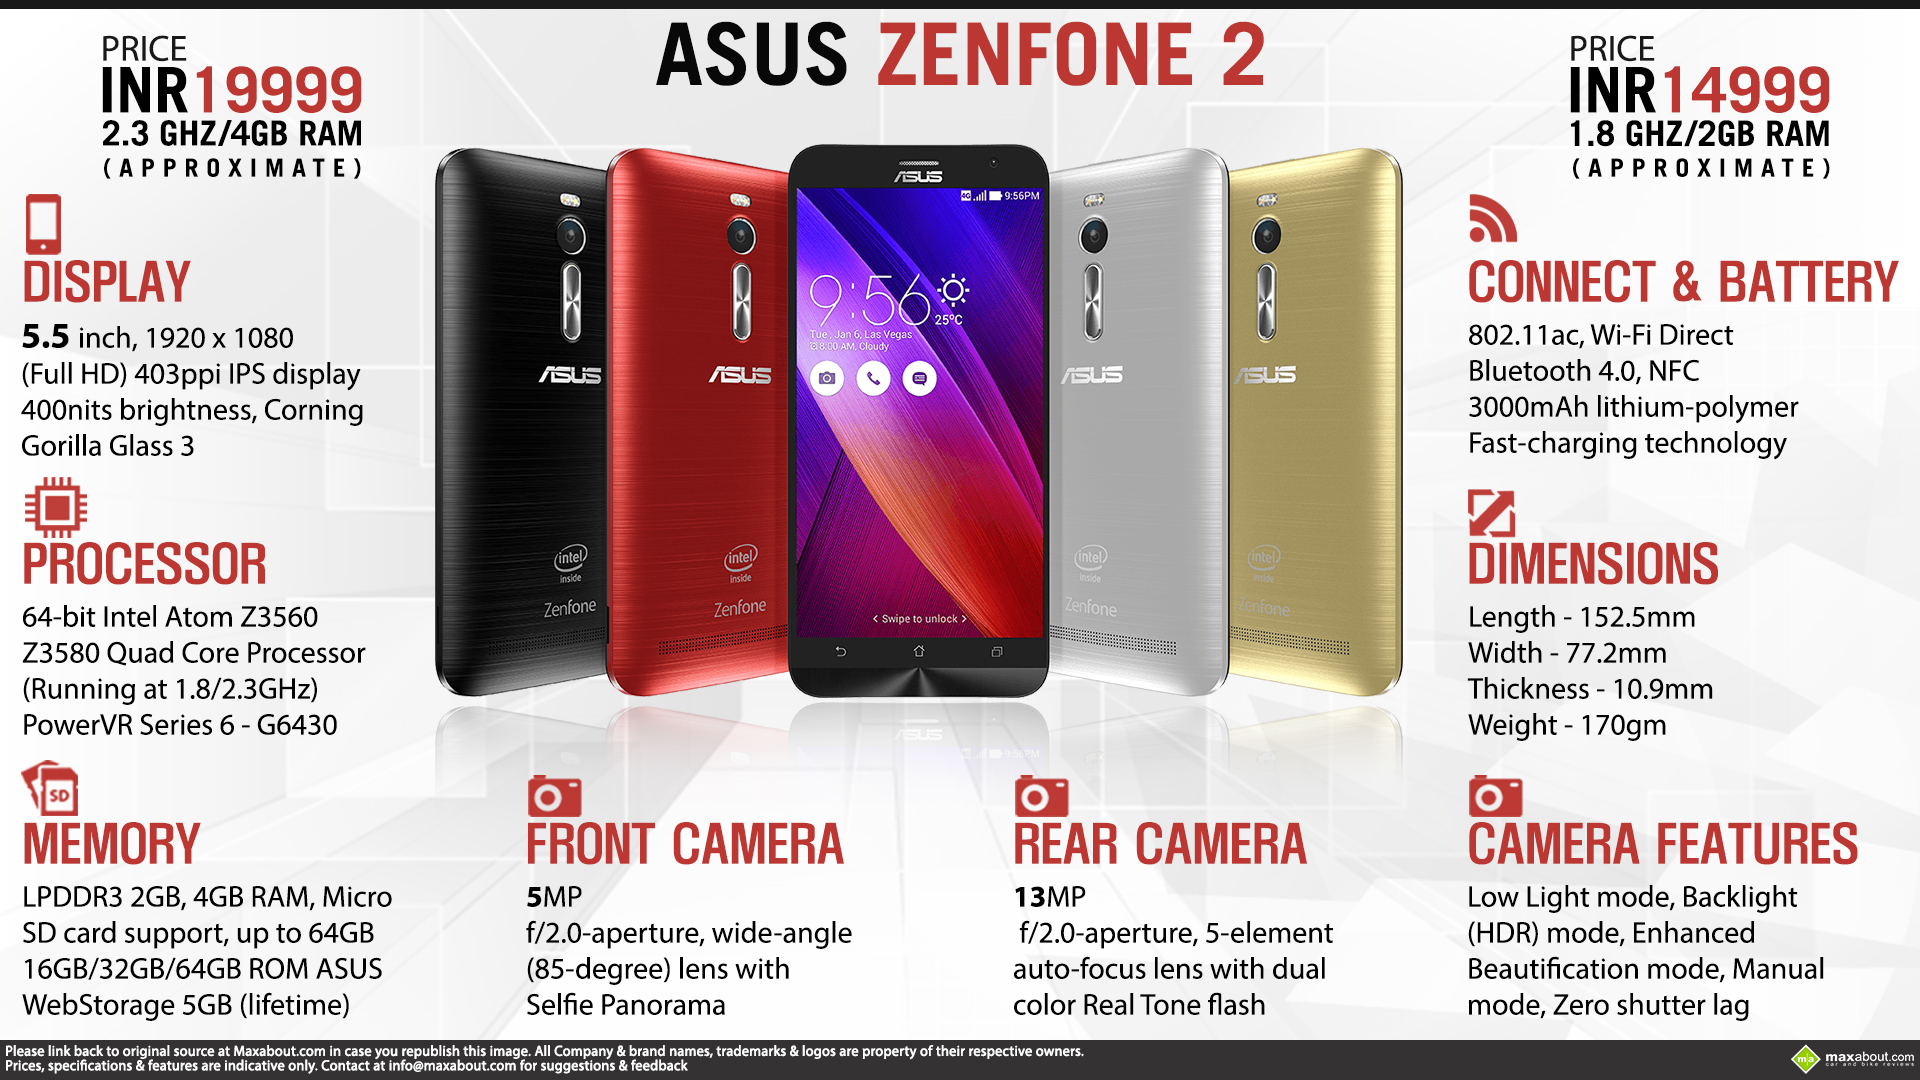 Quick Facts - ASUS ZenFone 2 ZE551ML (1.8GHz/2GB RAM and 2 ...